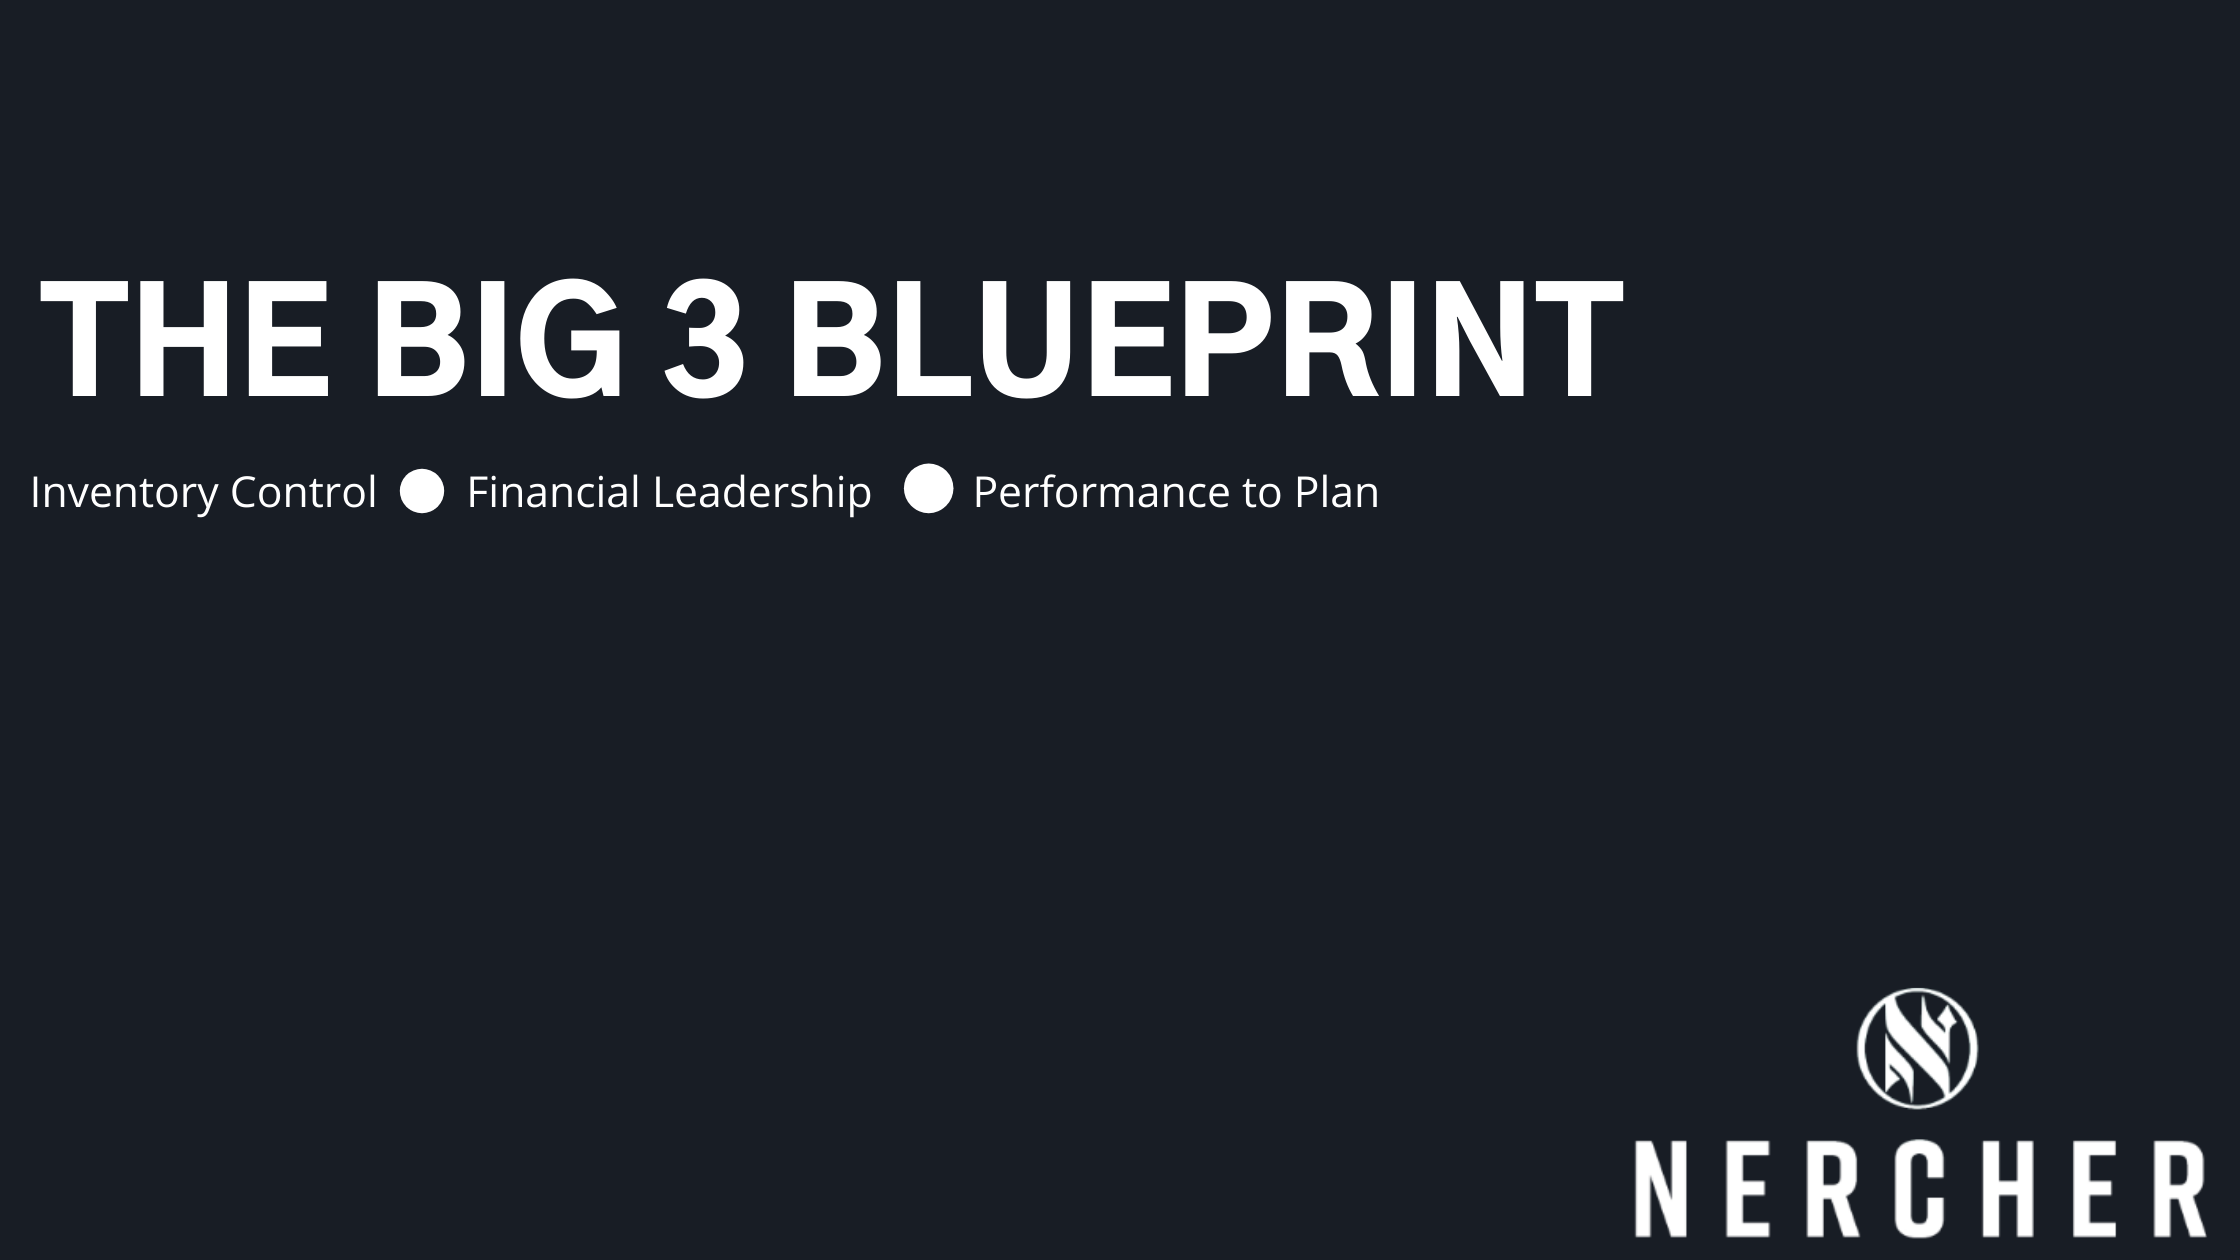 The Big 3 Blueprint: How to Set Your Small Business Up to Scale Responsibly